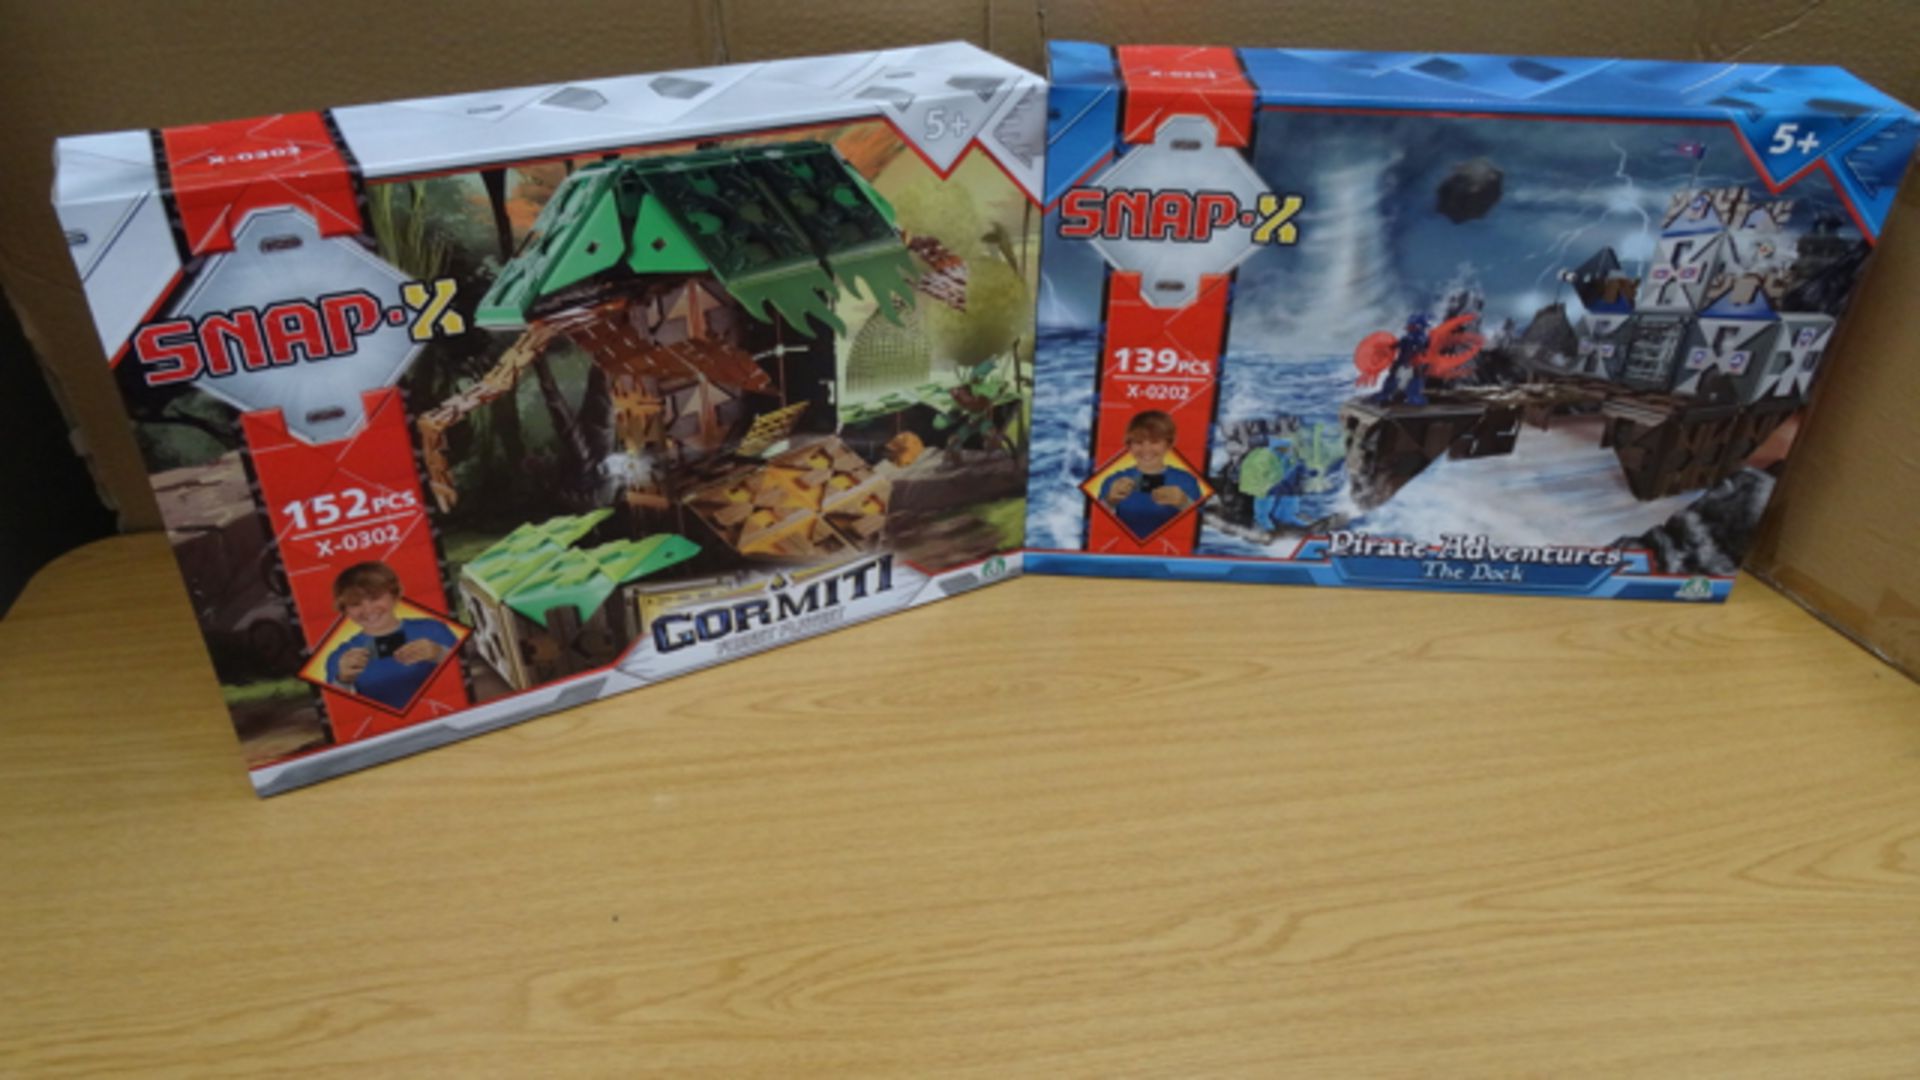 Christmas Toy Selection - 2 items to include: x Snap X Gormiti Forest large 152 piece 2 in 1